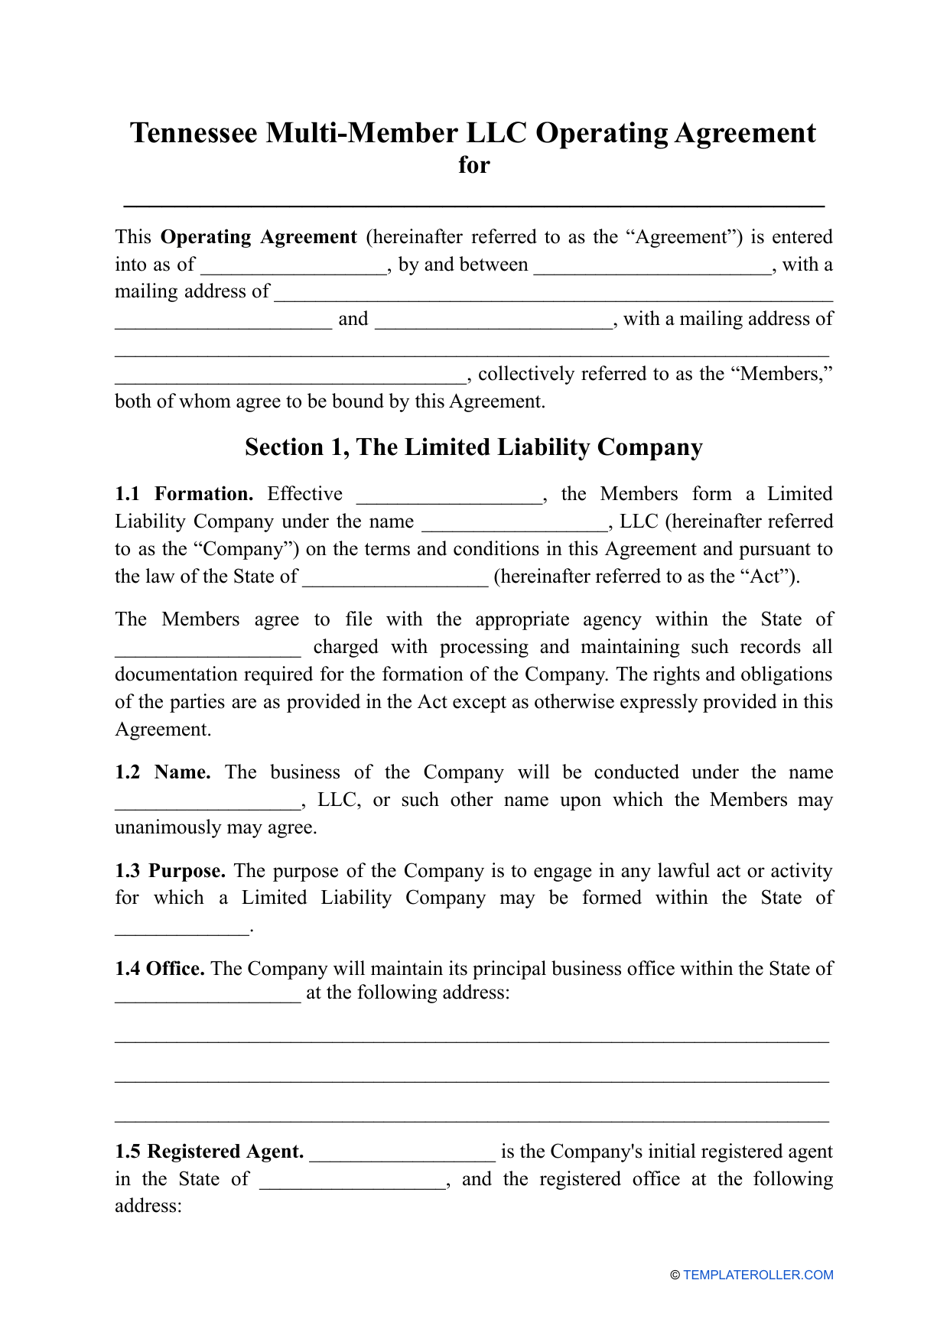 Multi-Member LLC Operating Agreement Template - Tennessee, Page 1